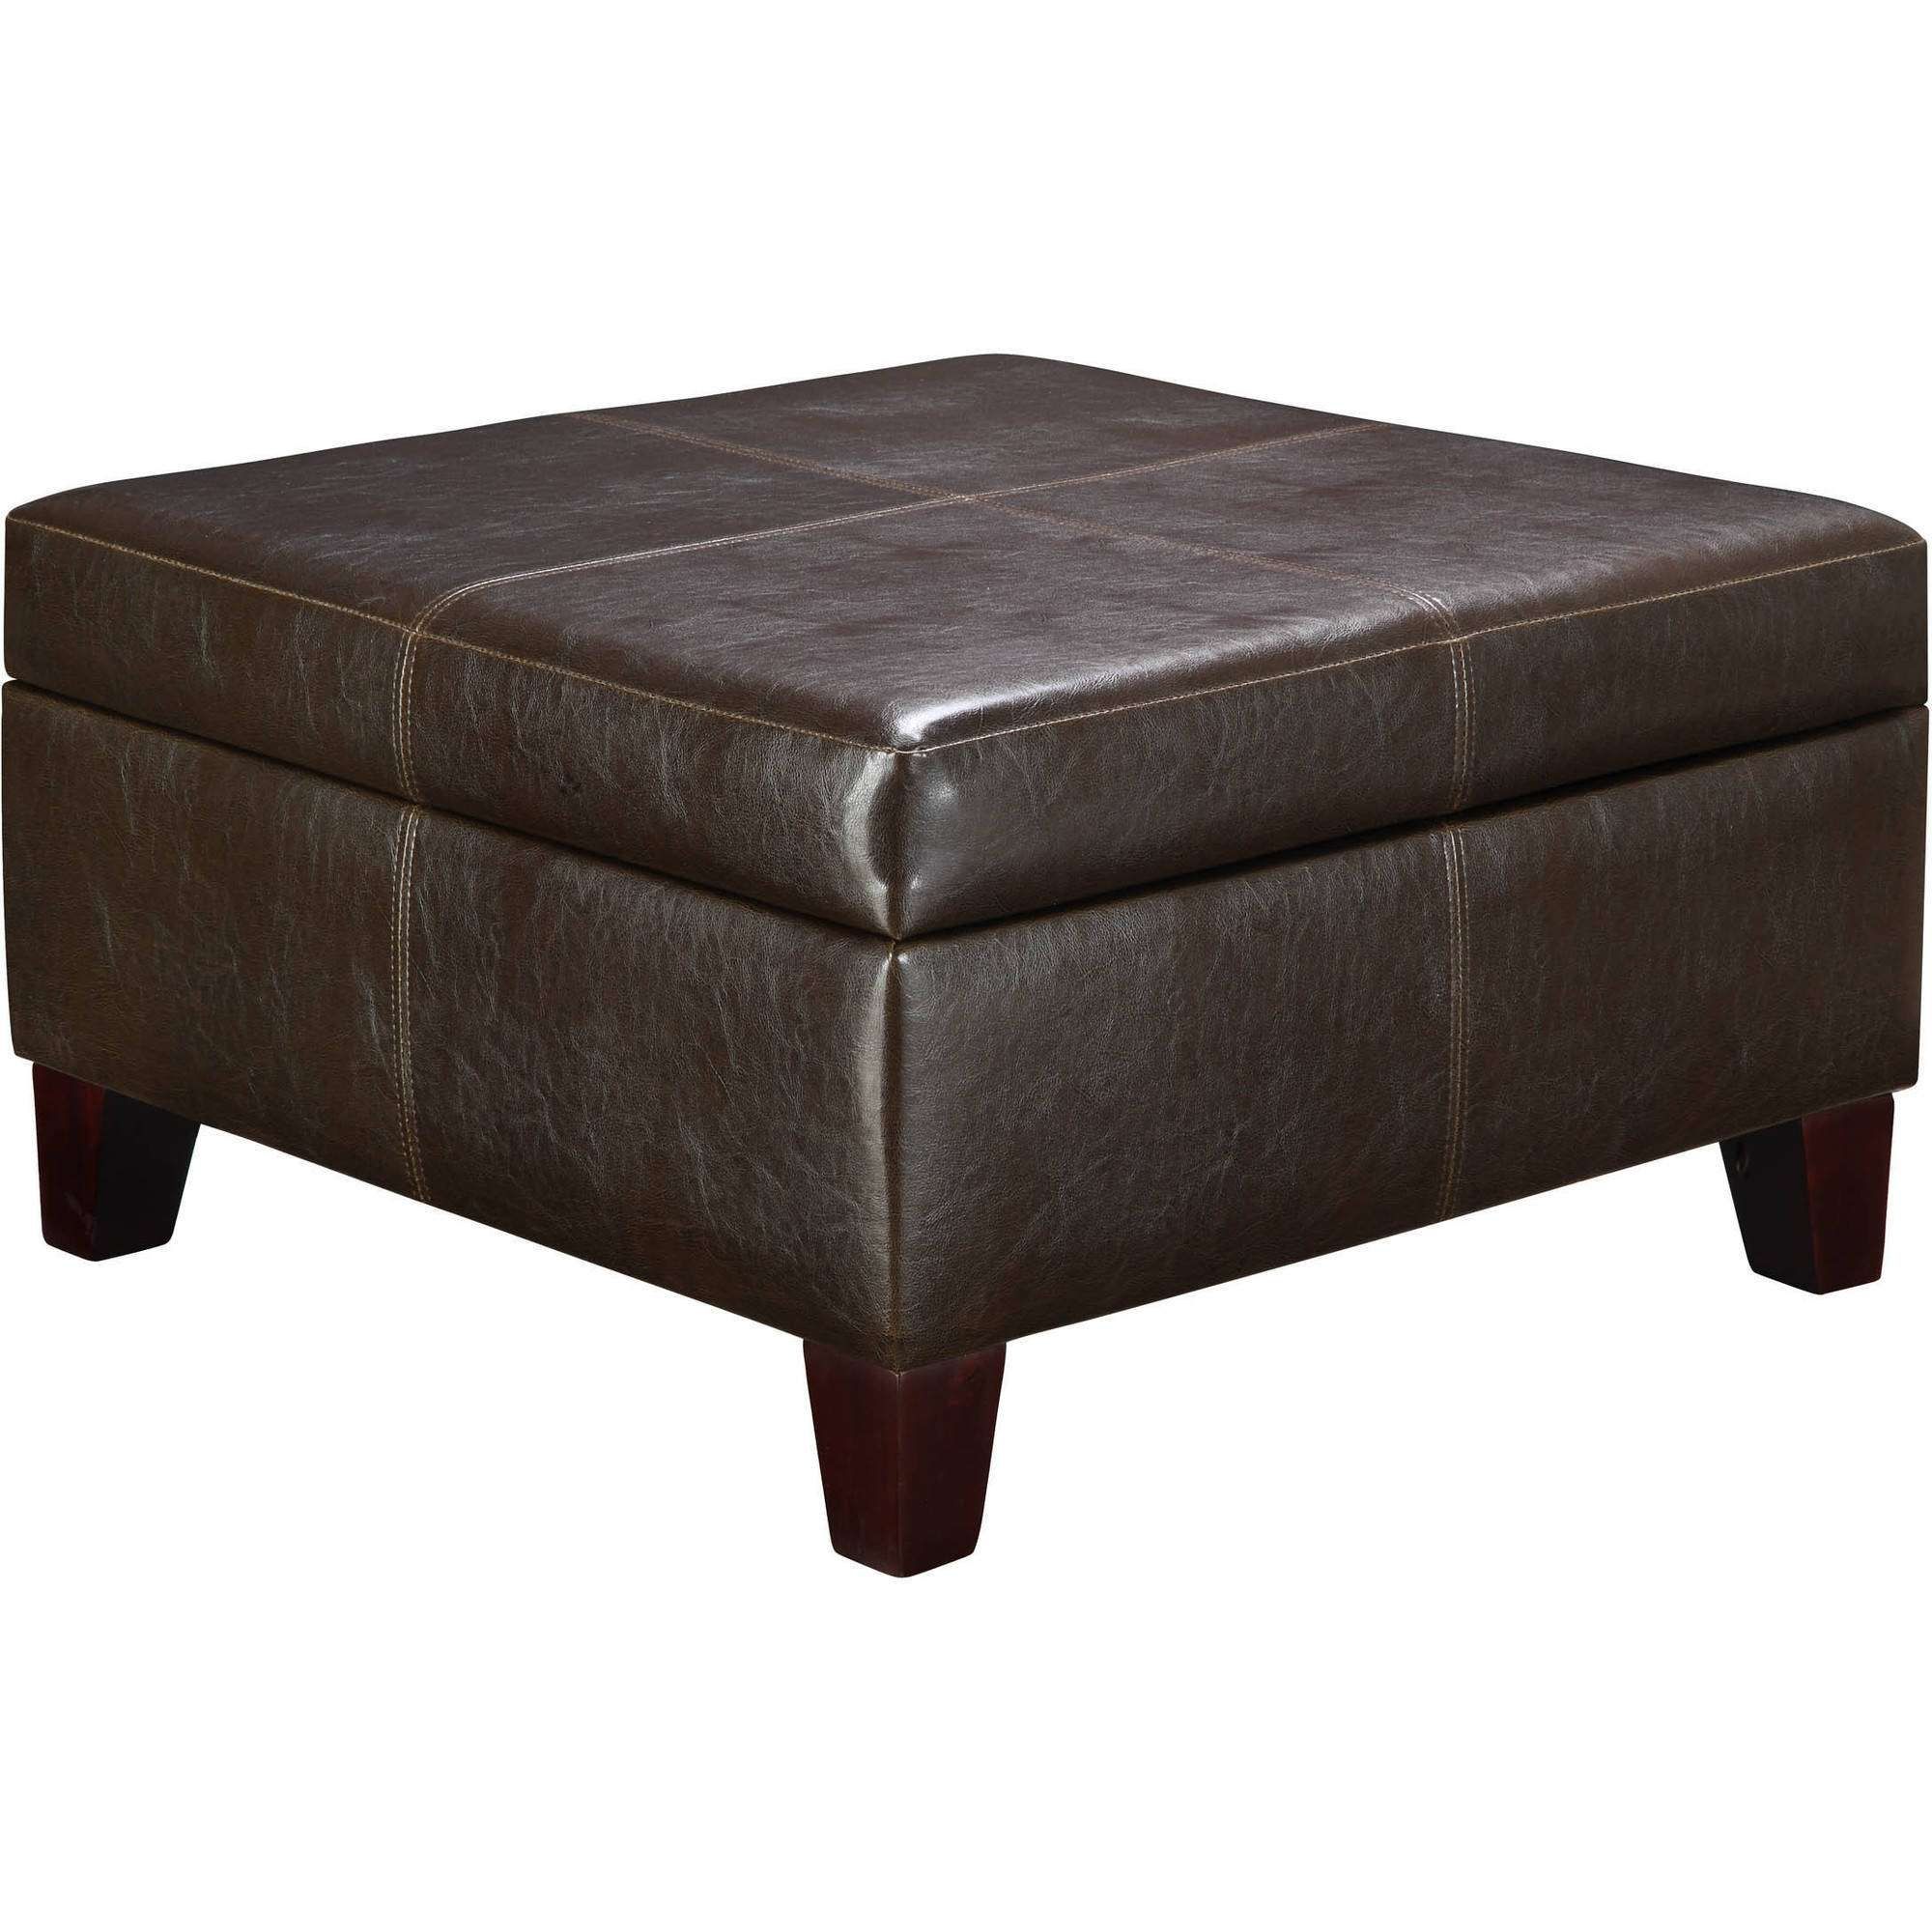 Ottomans – Walmart For Most Recently Released Leopard Ottoman Coffee Tables (Gallery 19 of 20)